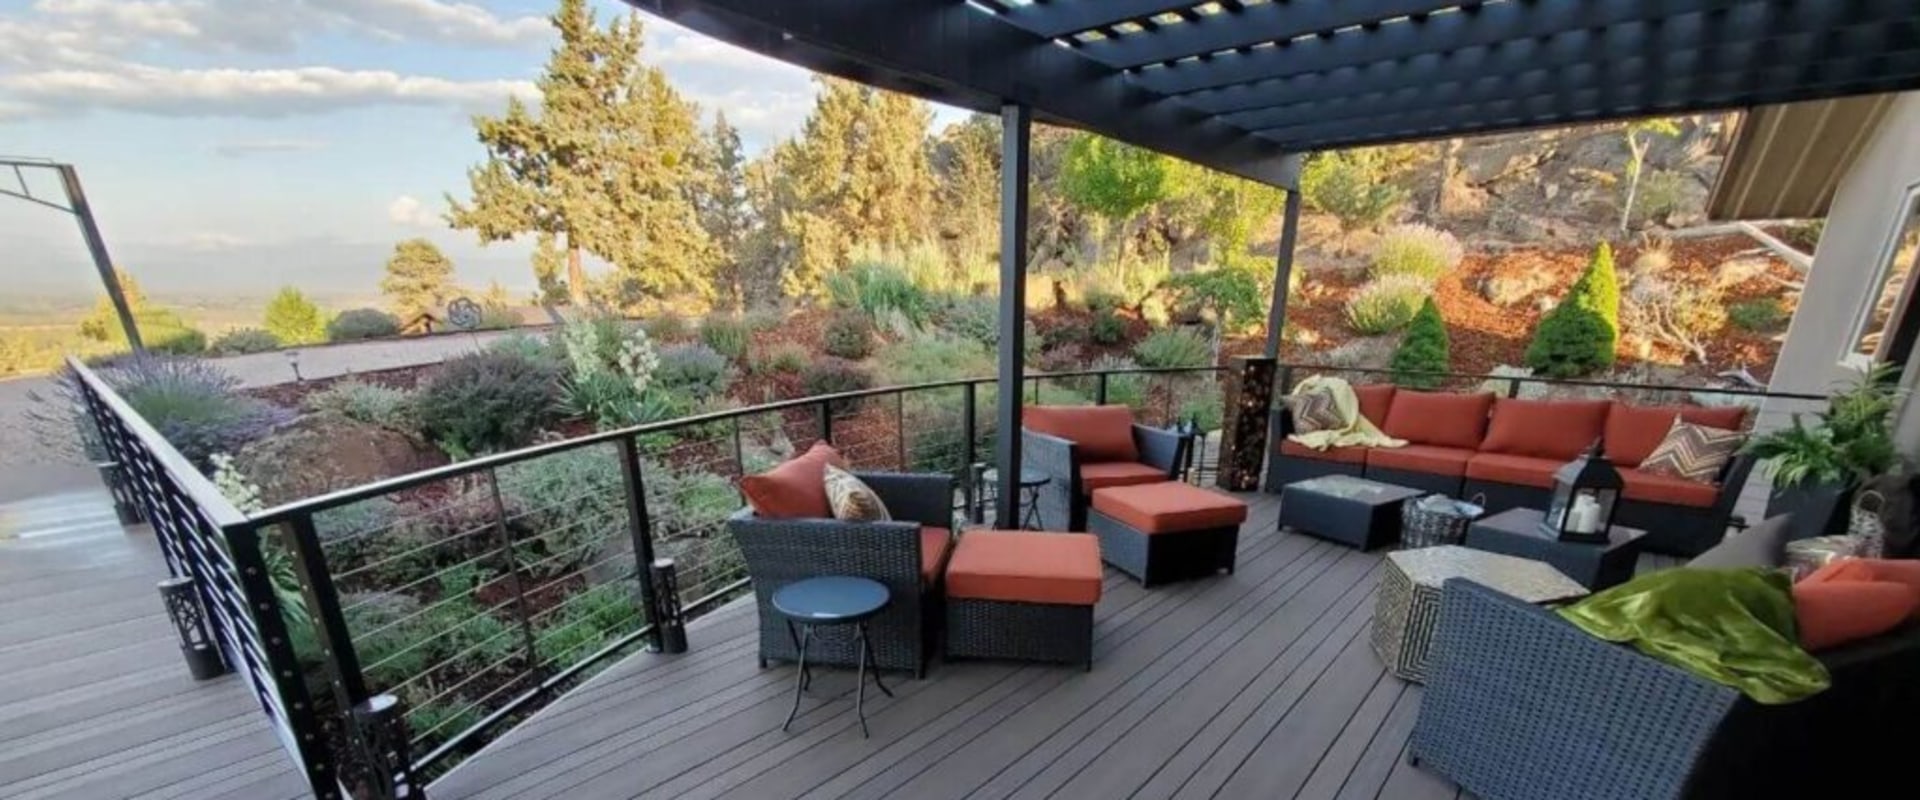 Deck and Patio Construction: A Guide to Maintaining and Improving Your Home